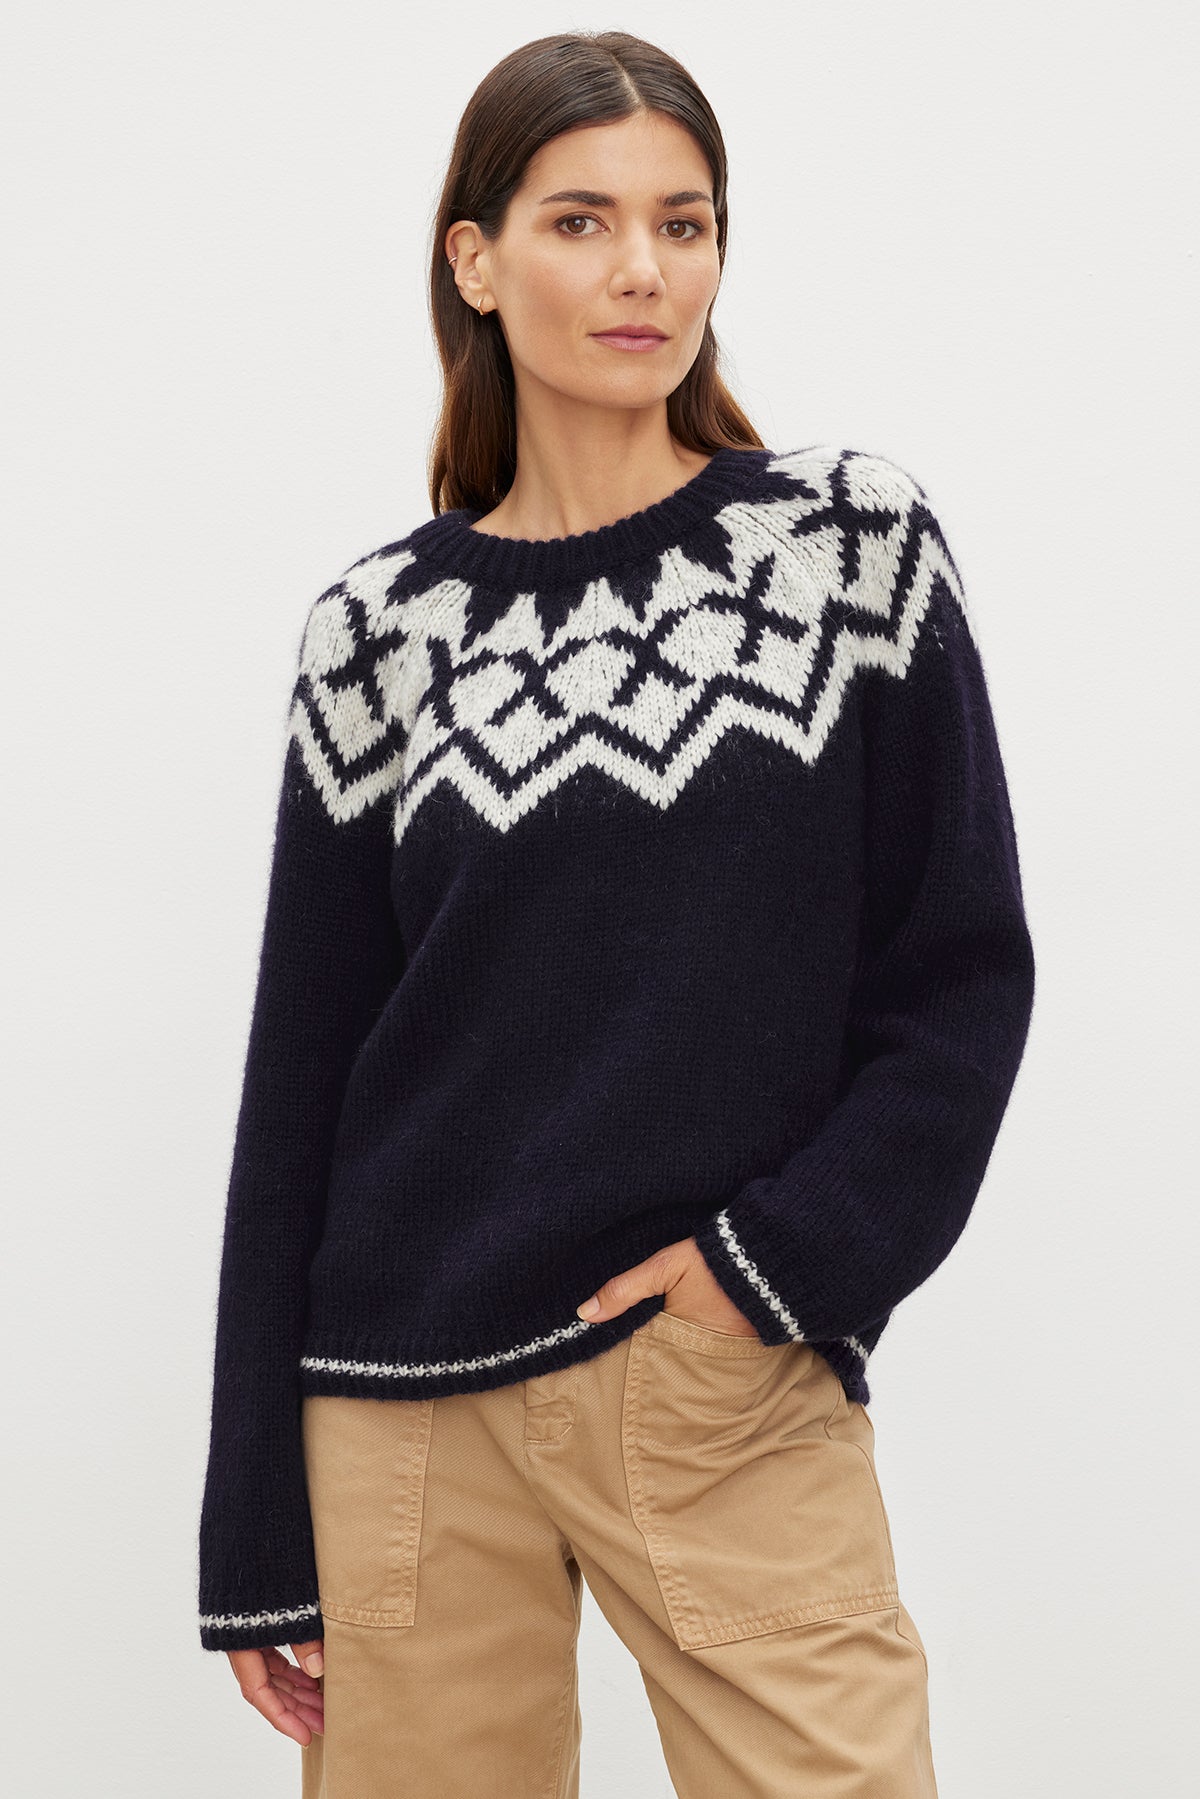 A woman wearing a navy Velvet by Graham & Spencer alpaca blend sweater with the ALEXA FAIR ISLE CREW NECK design and tan pants.-35572030046401